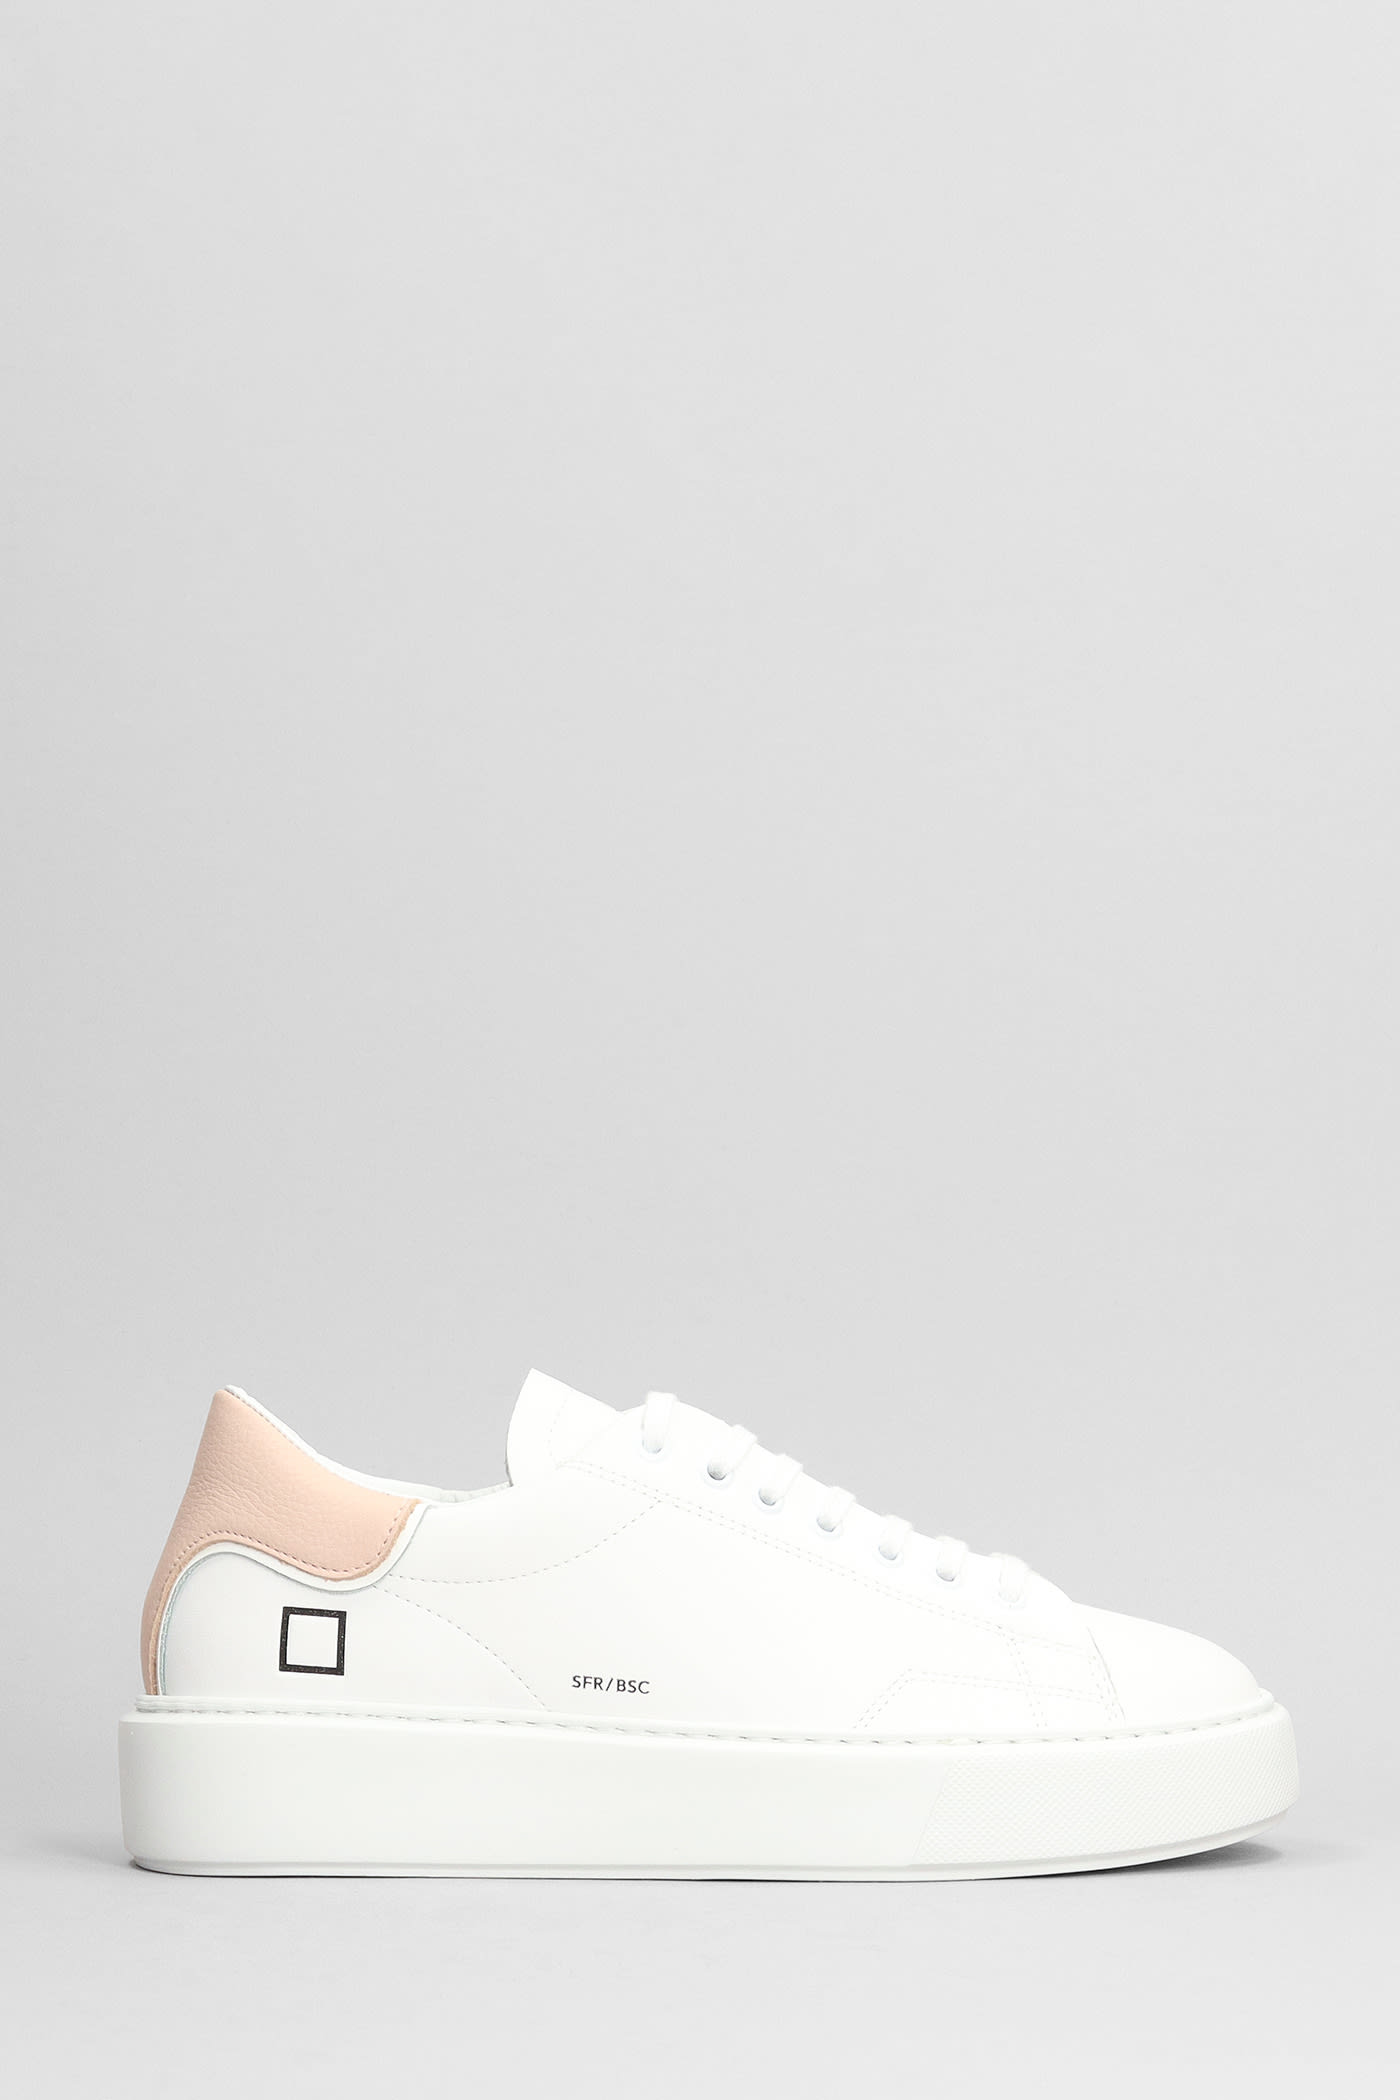 DATE SFERA BASIC SNEAKERS IN WHITE LEATHER